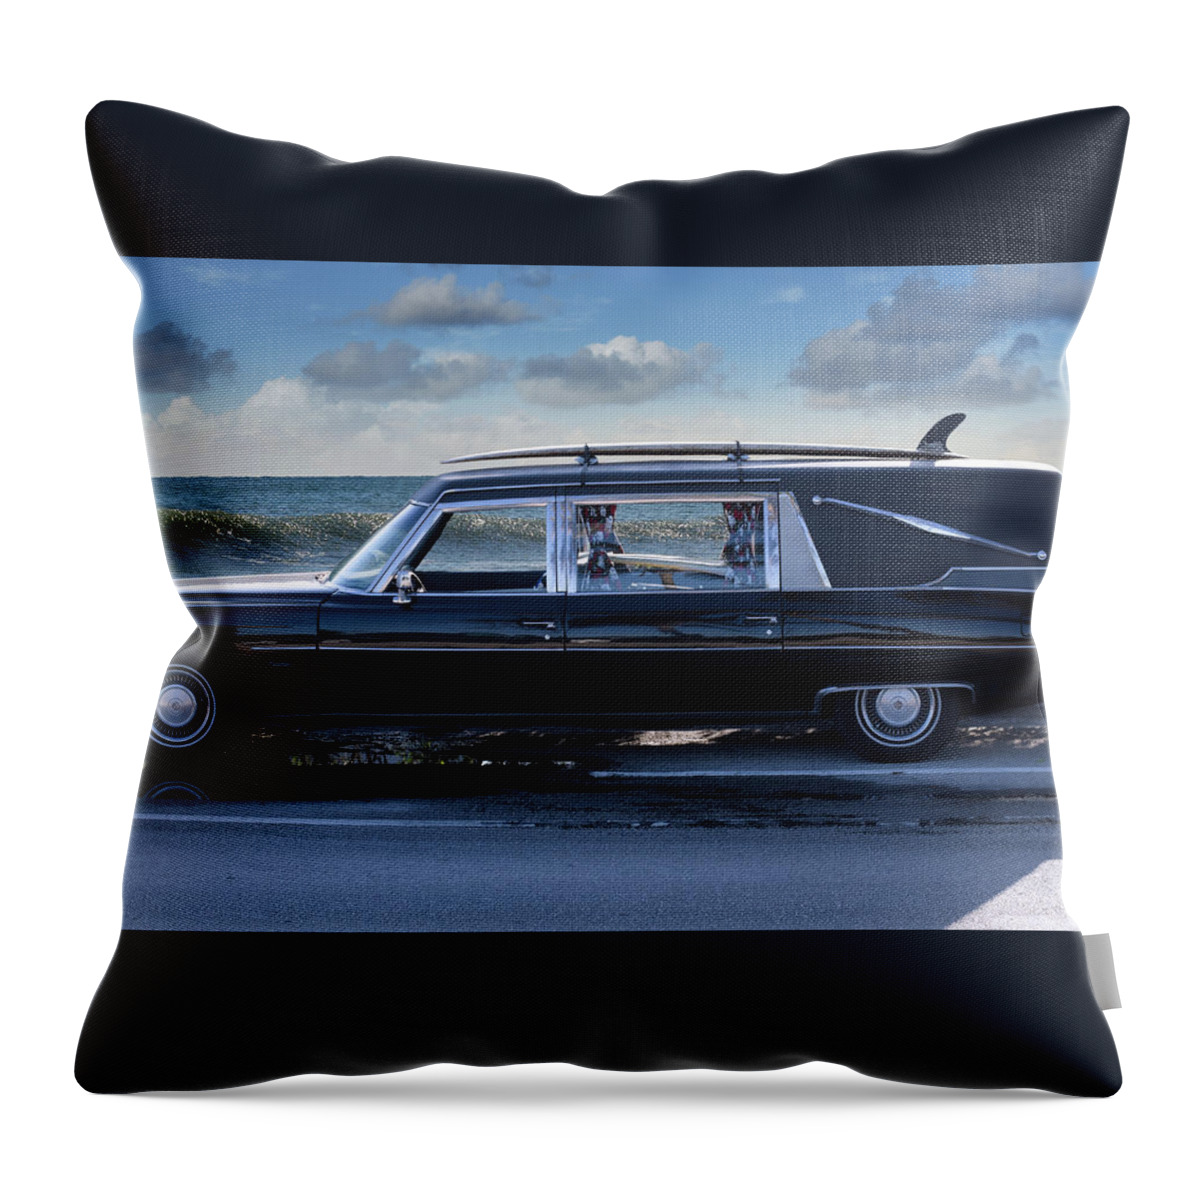 Surfer Throw Pillow featuring the photograph Surfer Wagon by Laura Fasulo